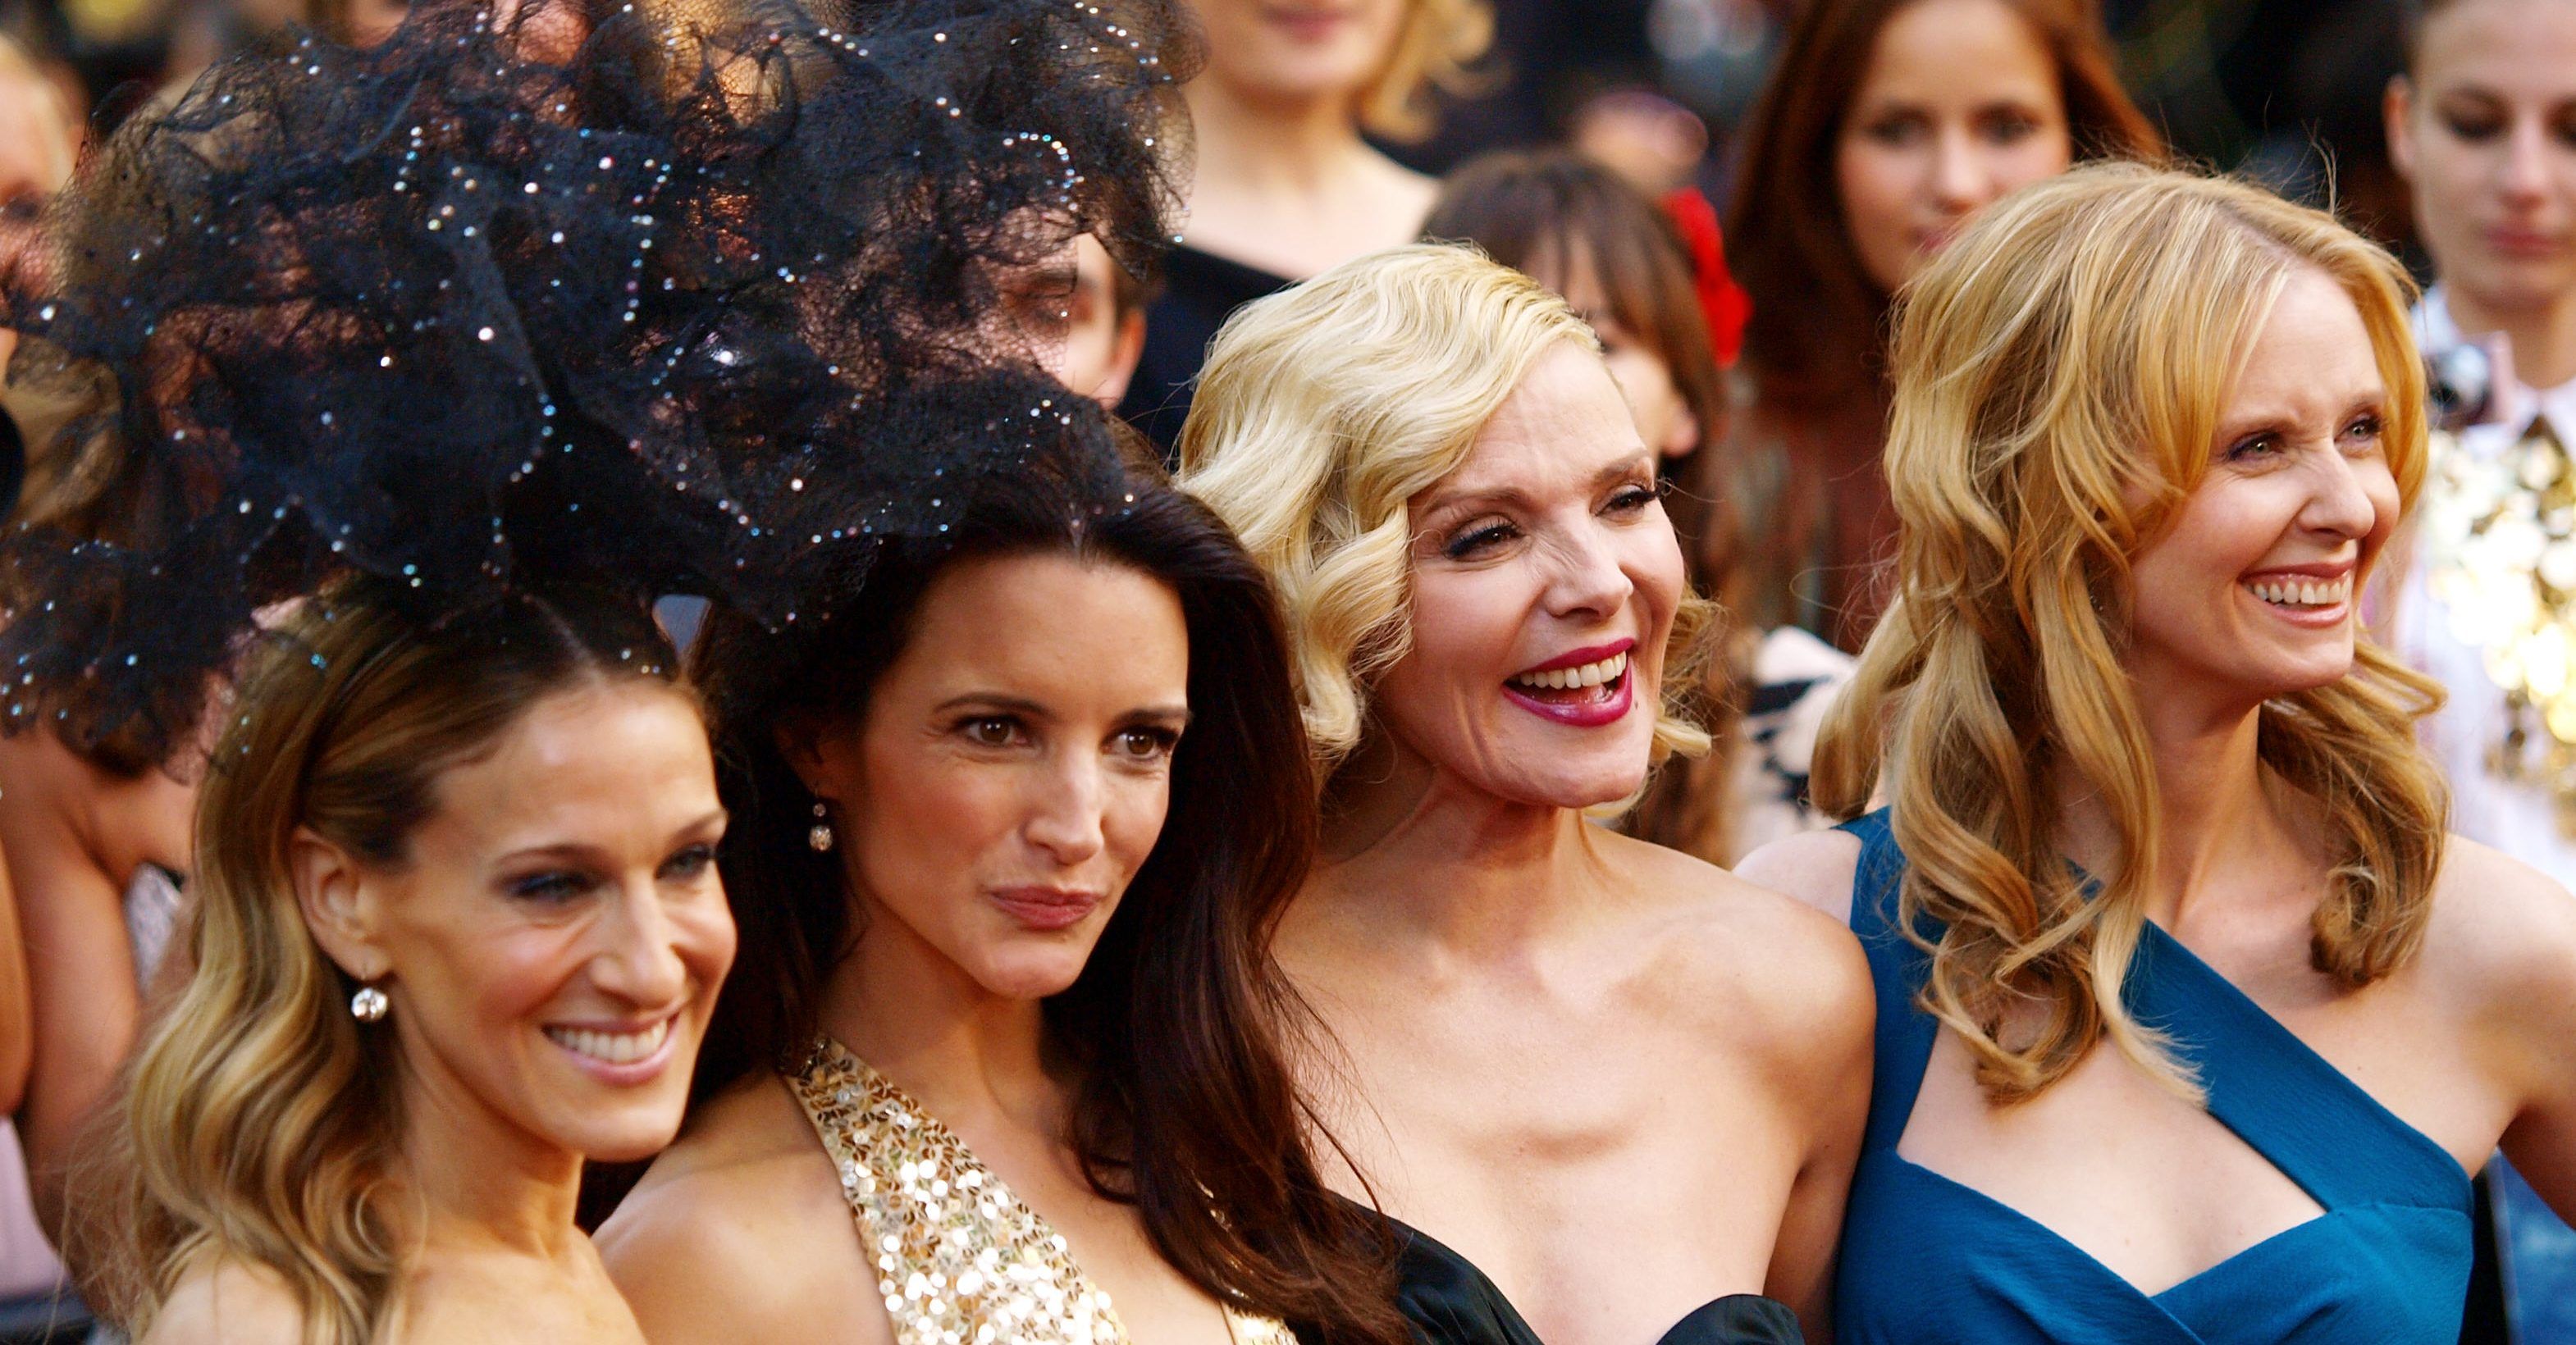 (FromL) US actress Sarah Jessica-Parker, US actress Kristin Davis, English actress Kim Cattrall and US actress Cynthia Nixon pose as they arrive at the UK premiere of 